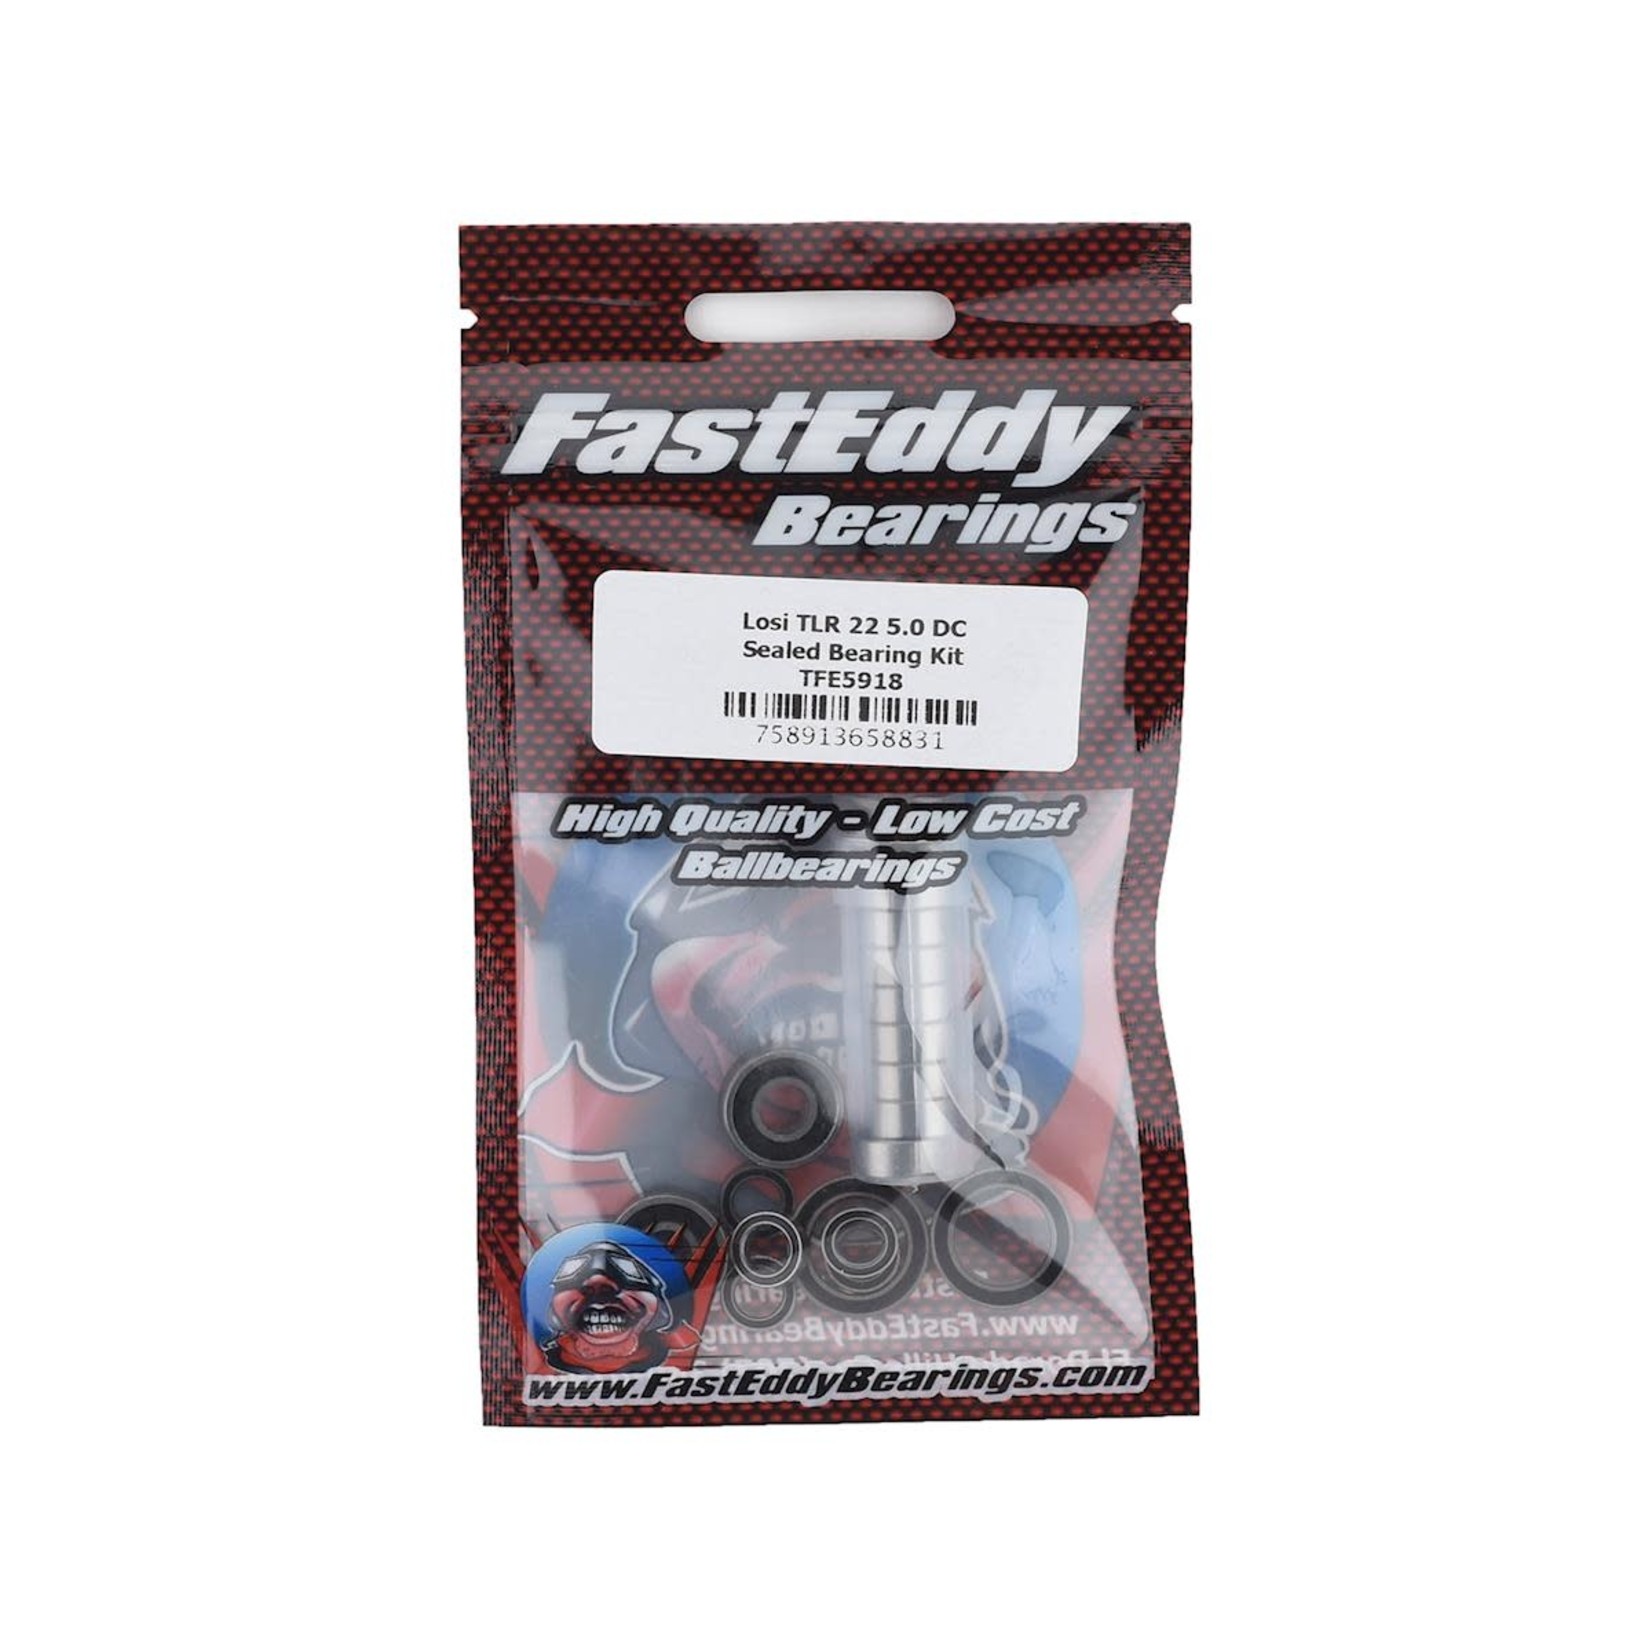 FastEddy FastEddy Losi TLR 22 5.0 DC Sealed Bearing Kit #TFE5918